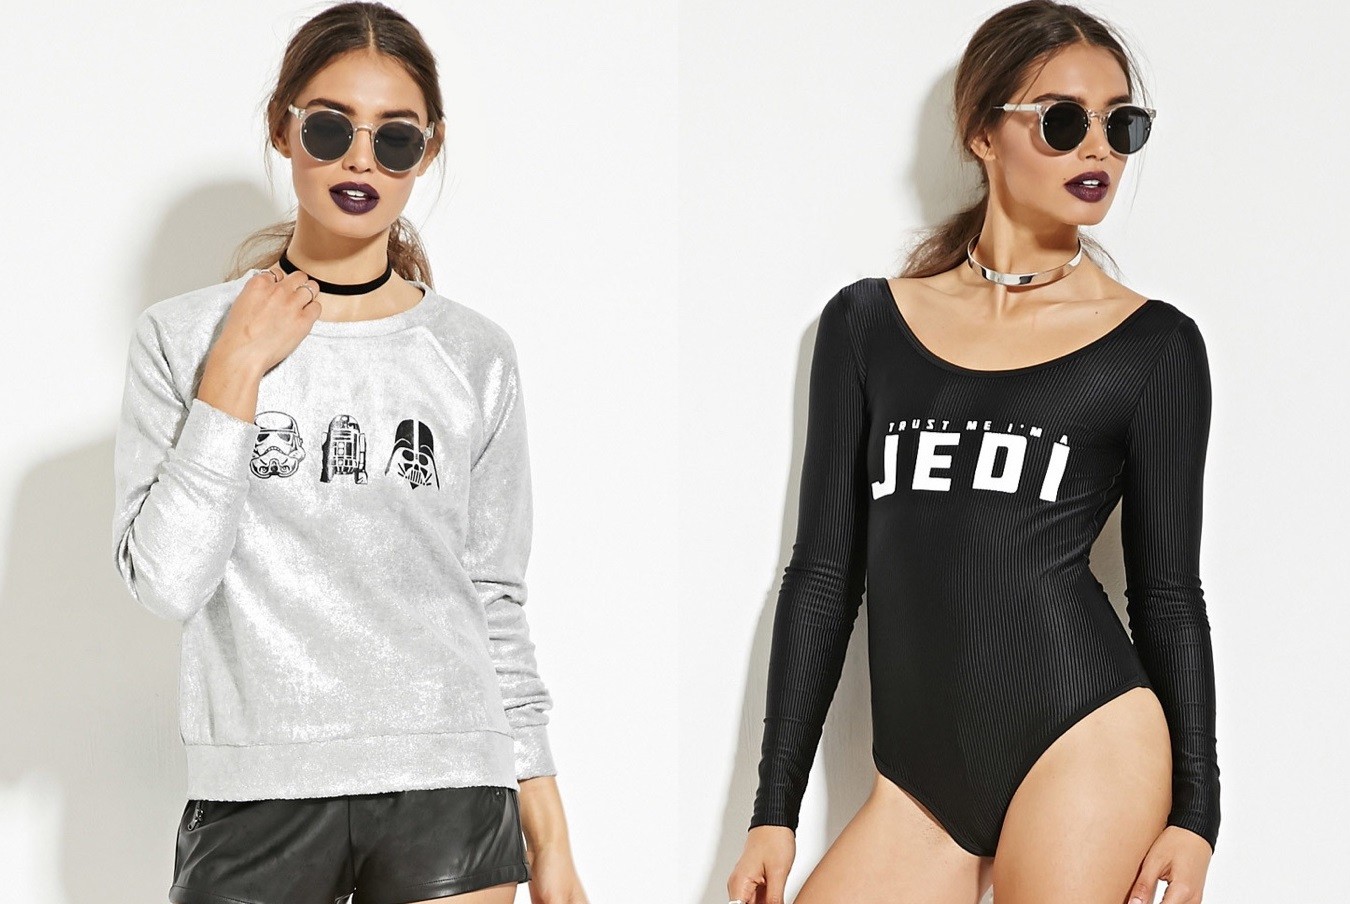 Forever 21 x Star Wars fashion collection